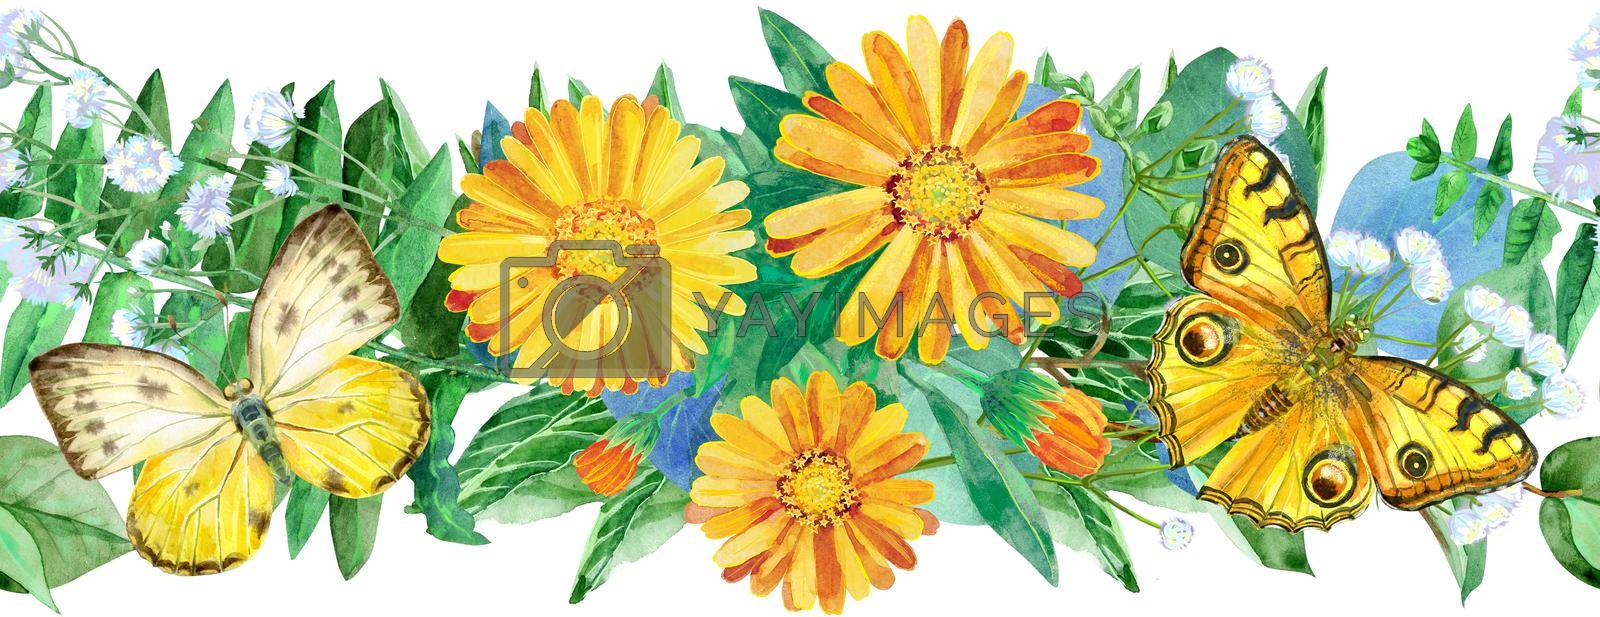 Royalty free image of Seamless floral border with yellow butterfly and calendula flowers on white background by NataOmsk